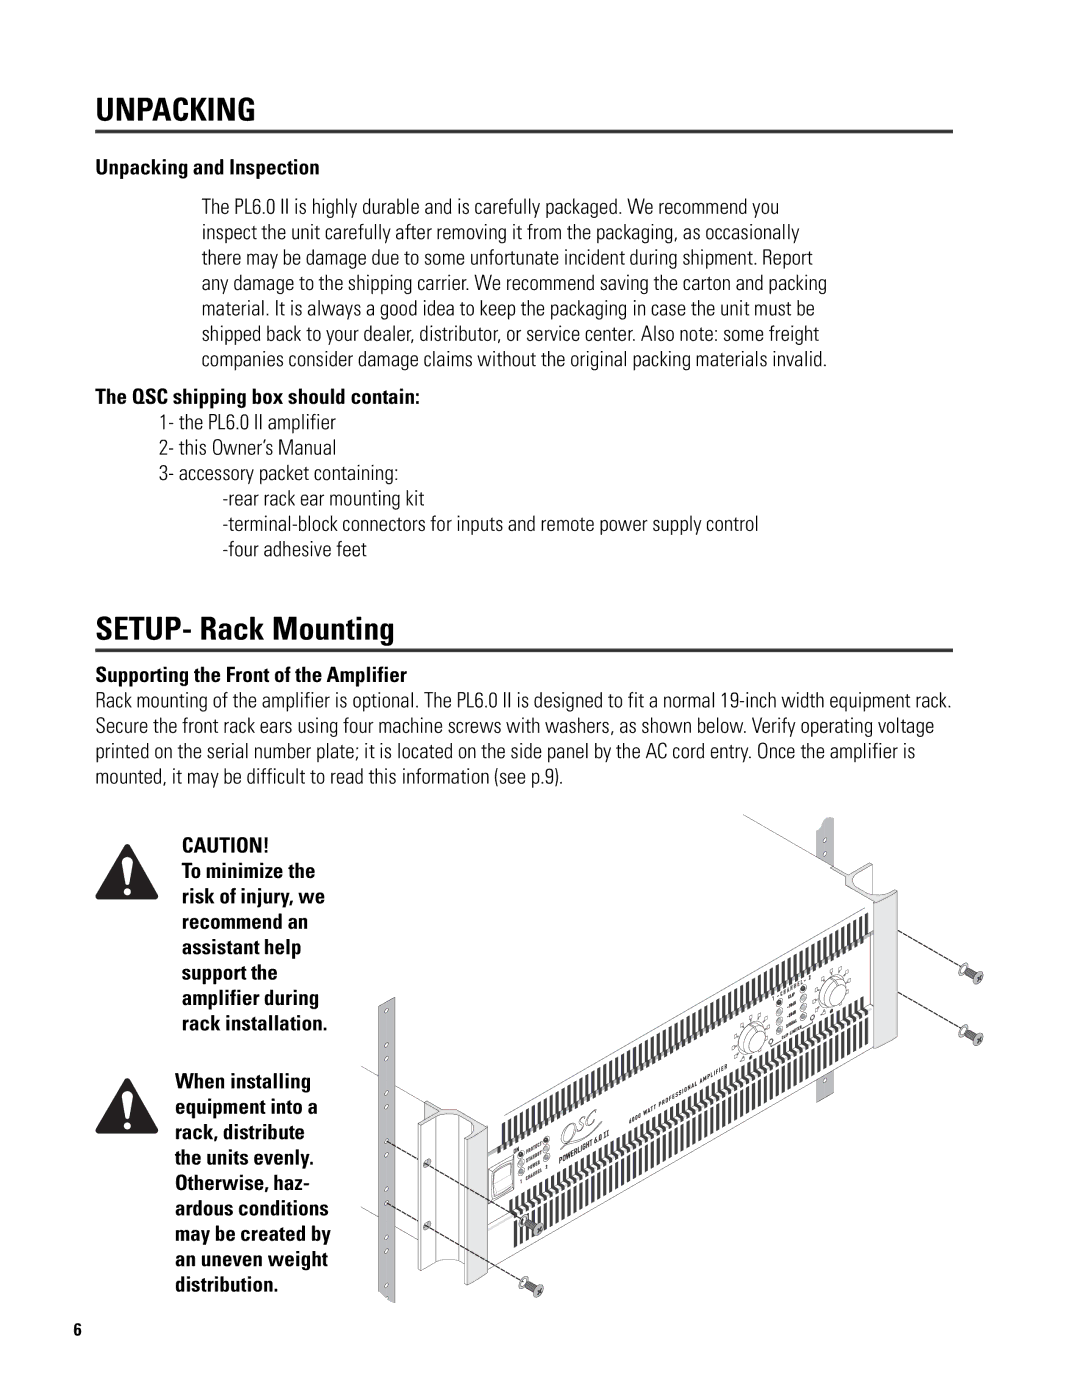 QSC Audio 6.0 II user manual Unpacking and Inspection, SETUP- Rack Mounting, Supporting the Front of the Amplifier 